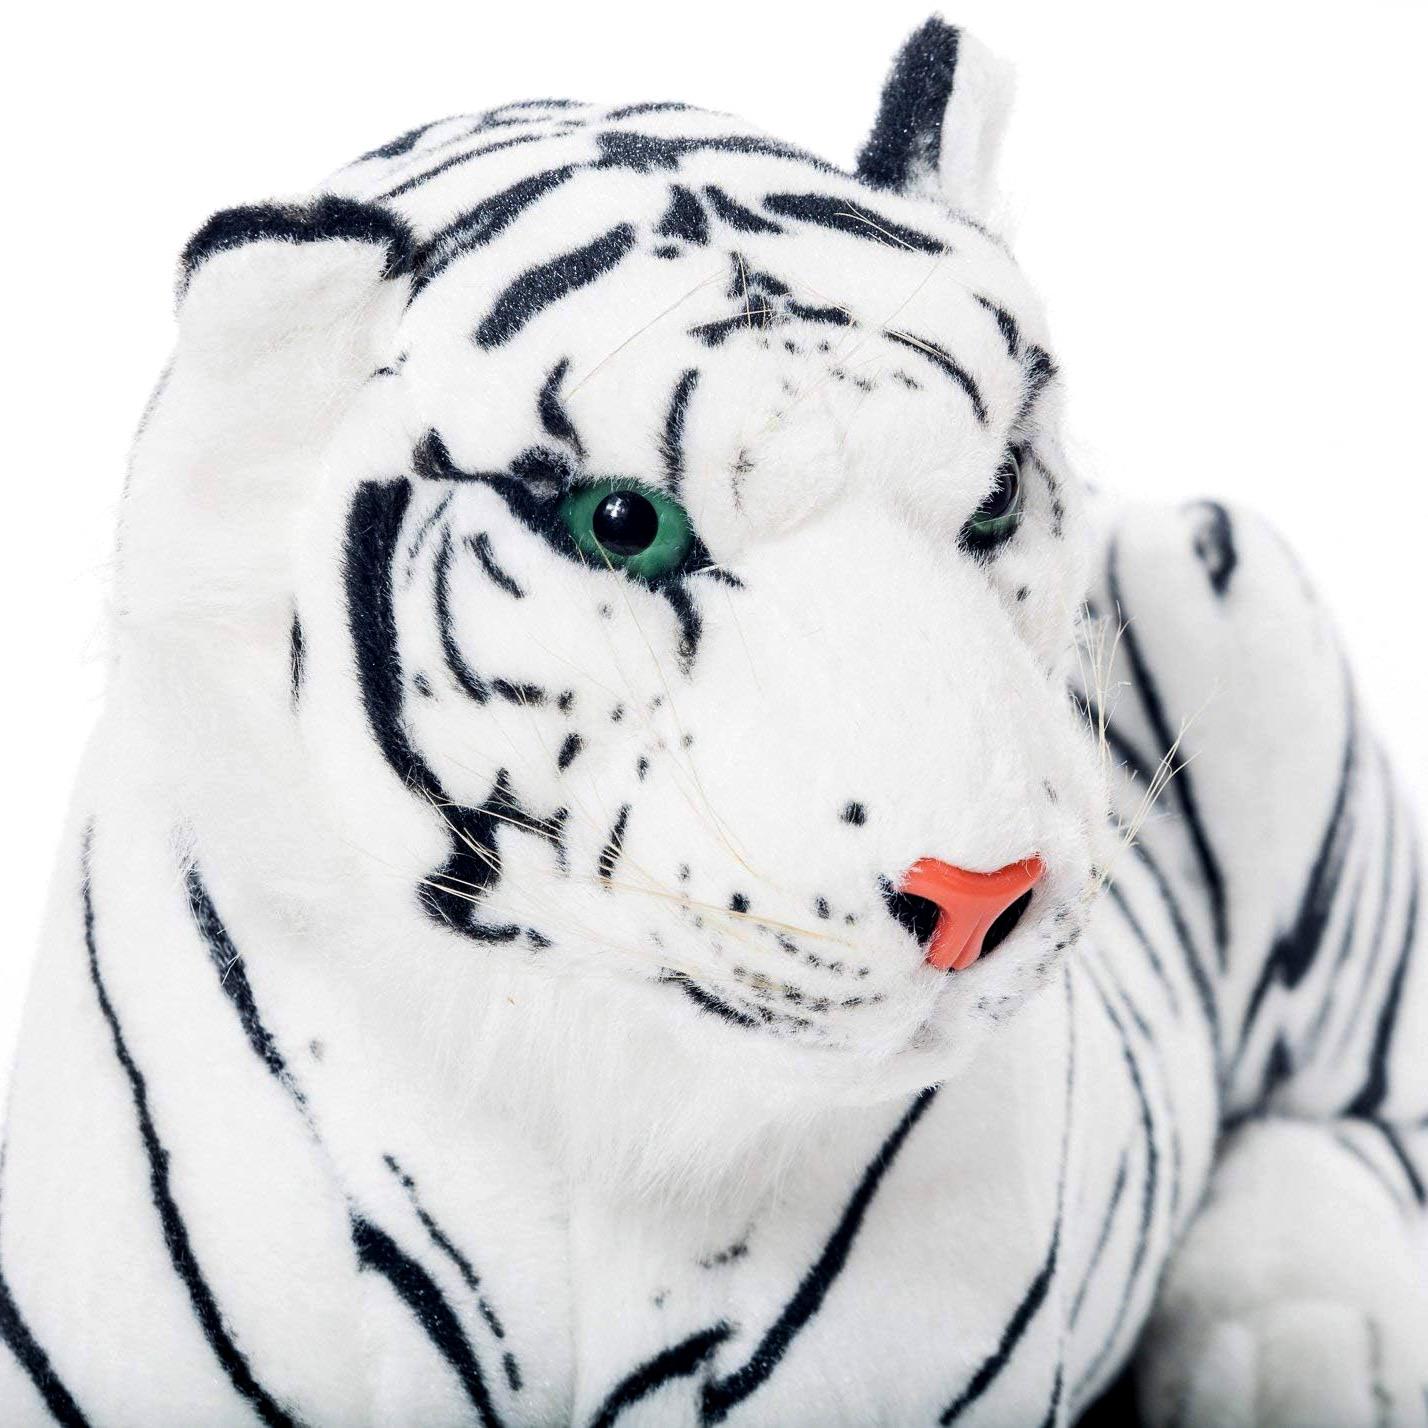 Small White Tiger Soft Plush Toy by The Magic Toy Shop - UKBuyZone